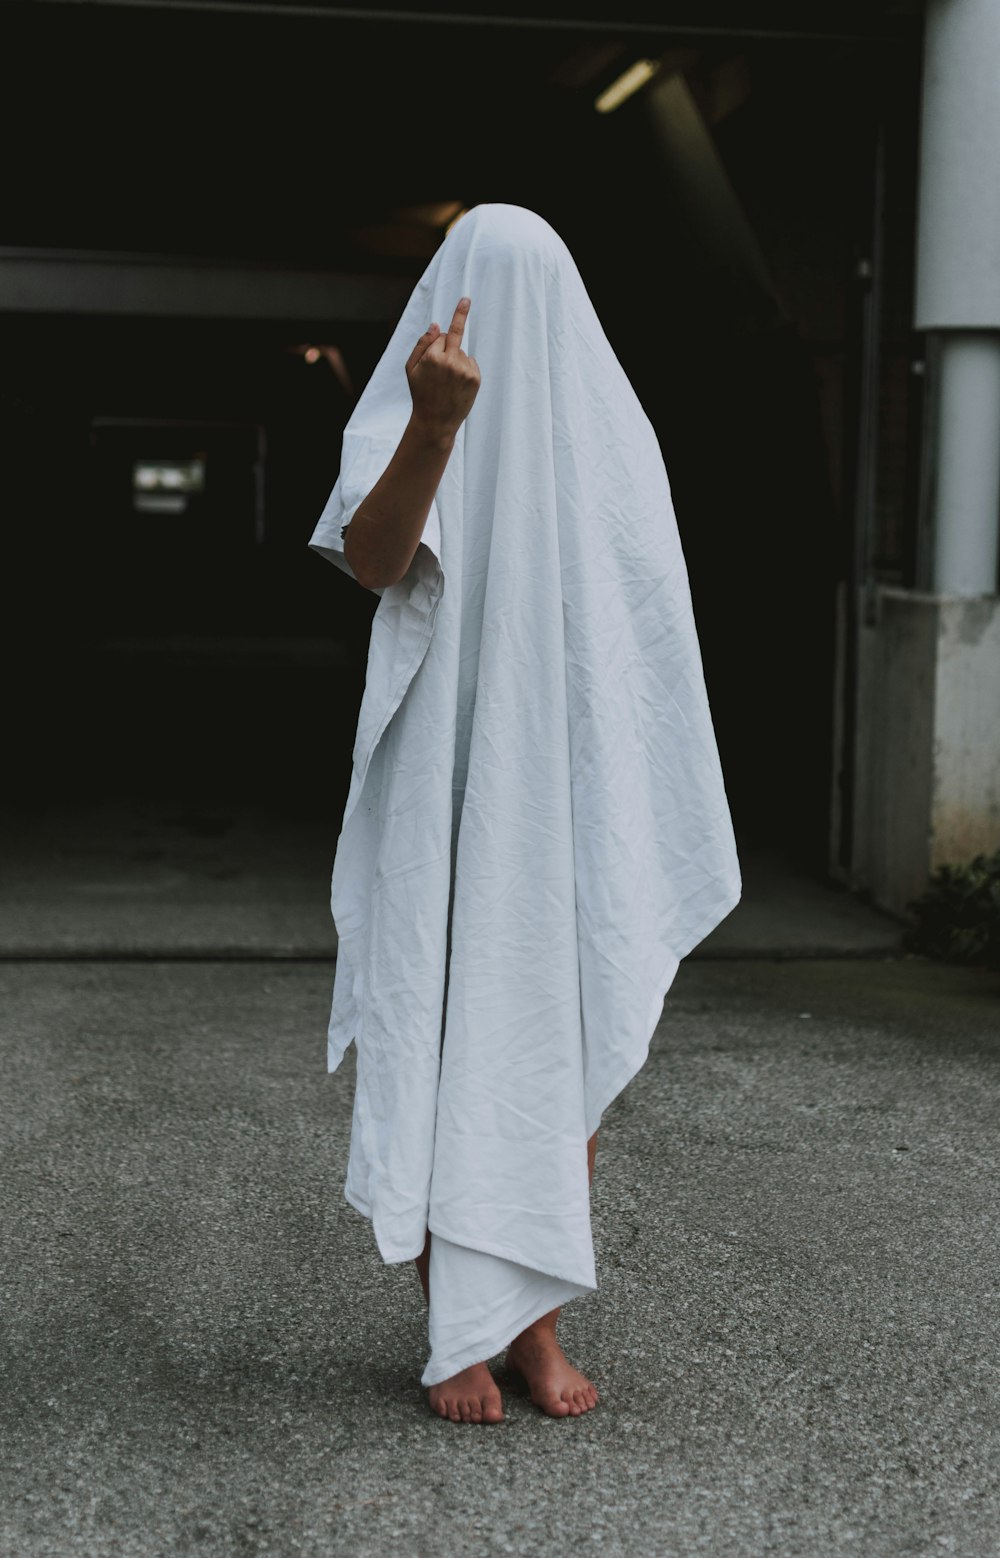 person covered in white textile showing middle finger